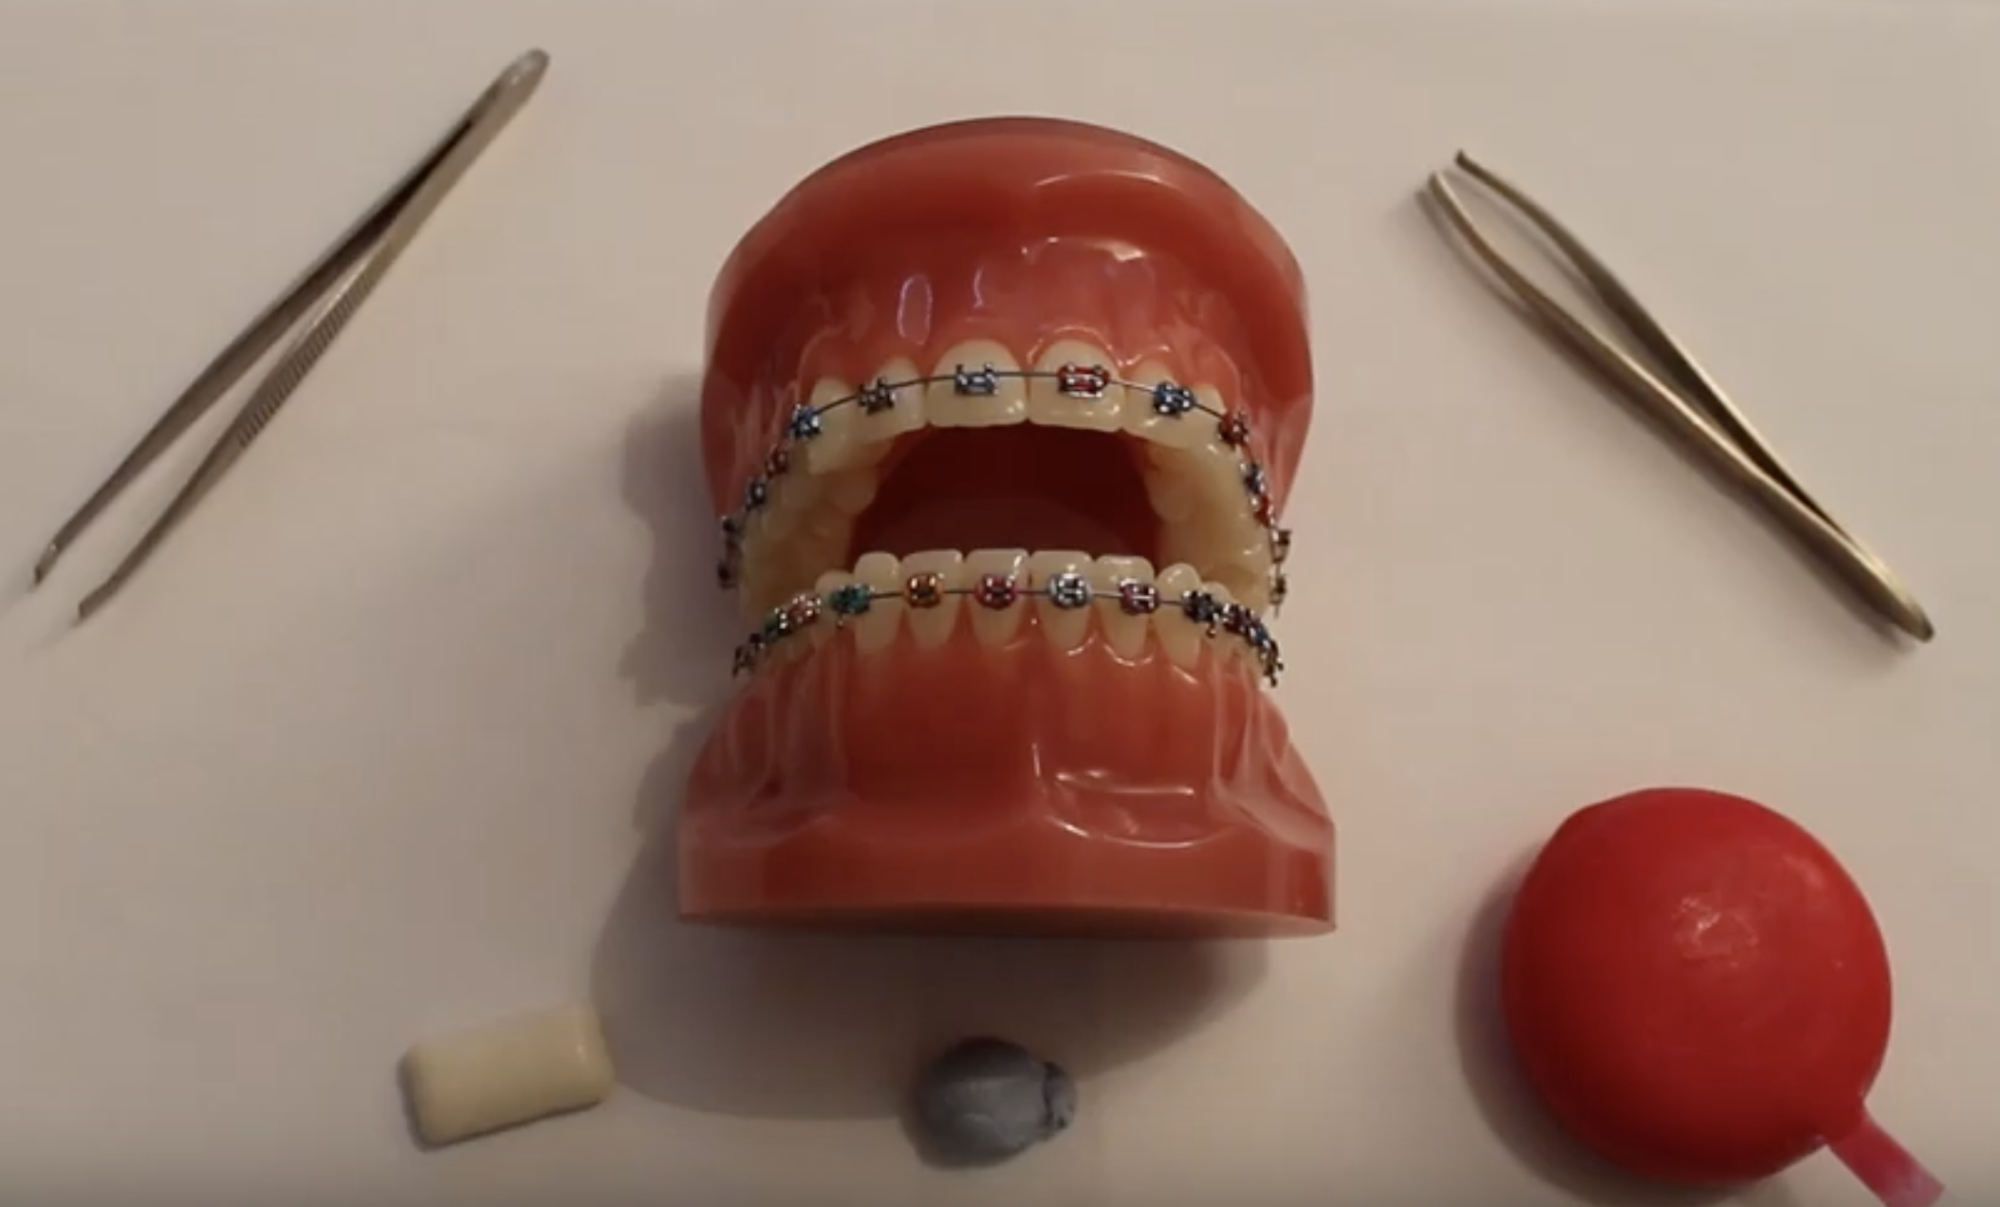 Loose module or loose wire on your braces